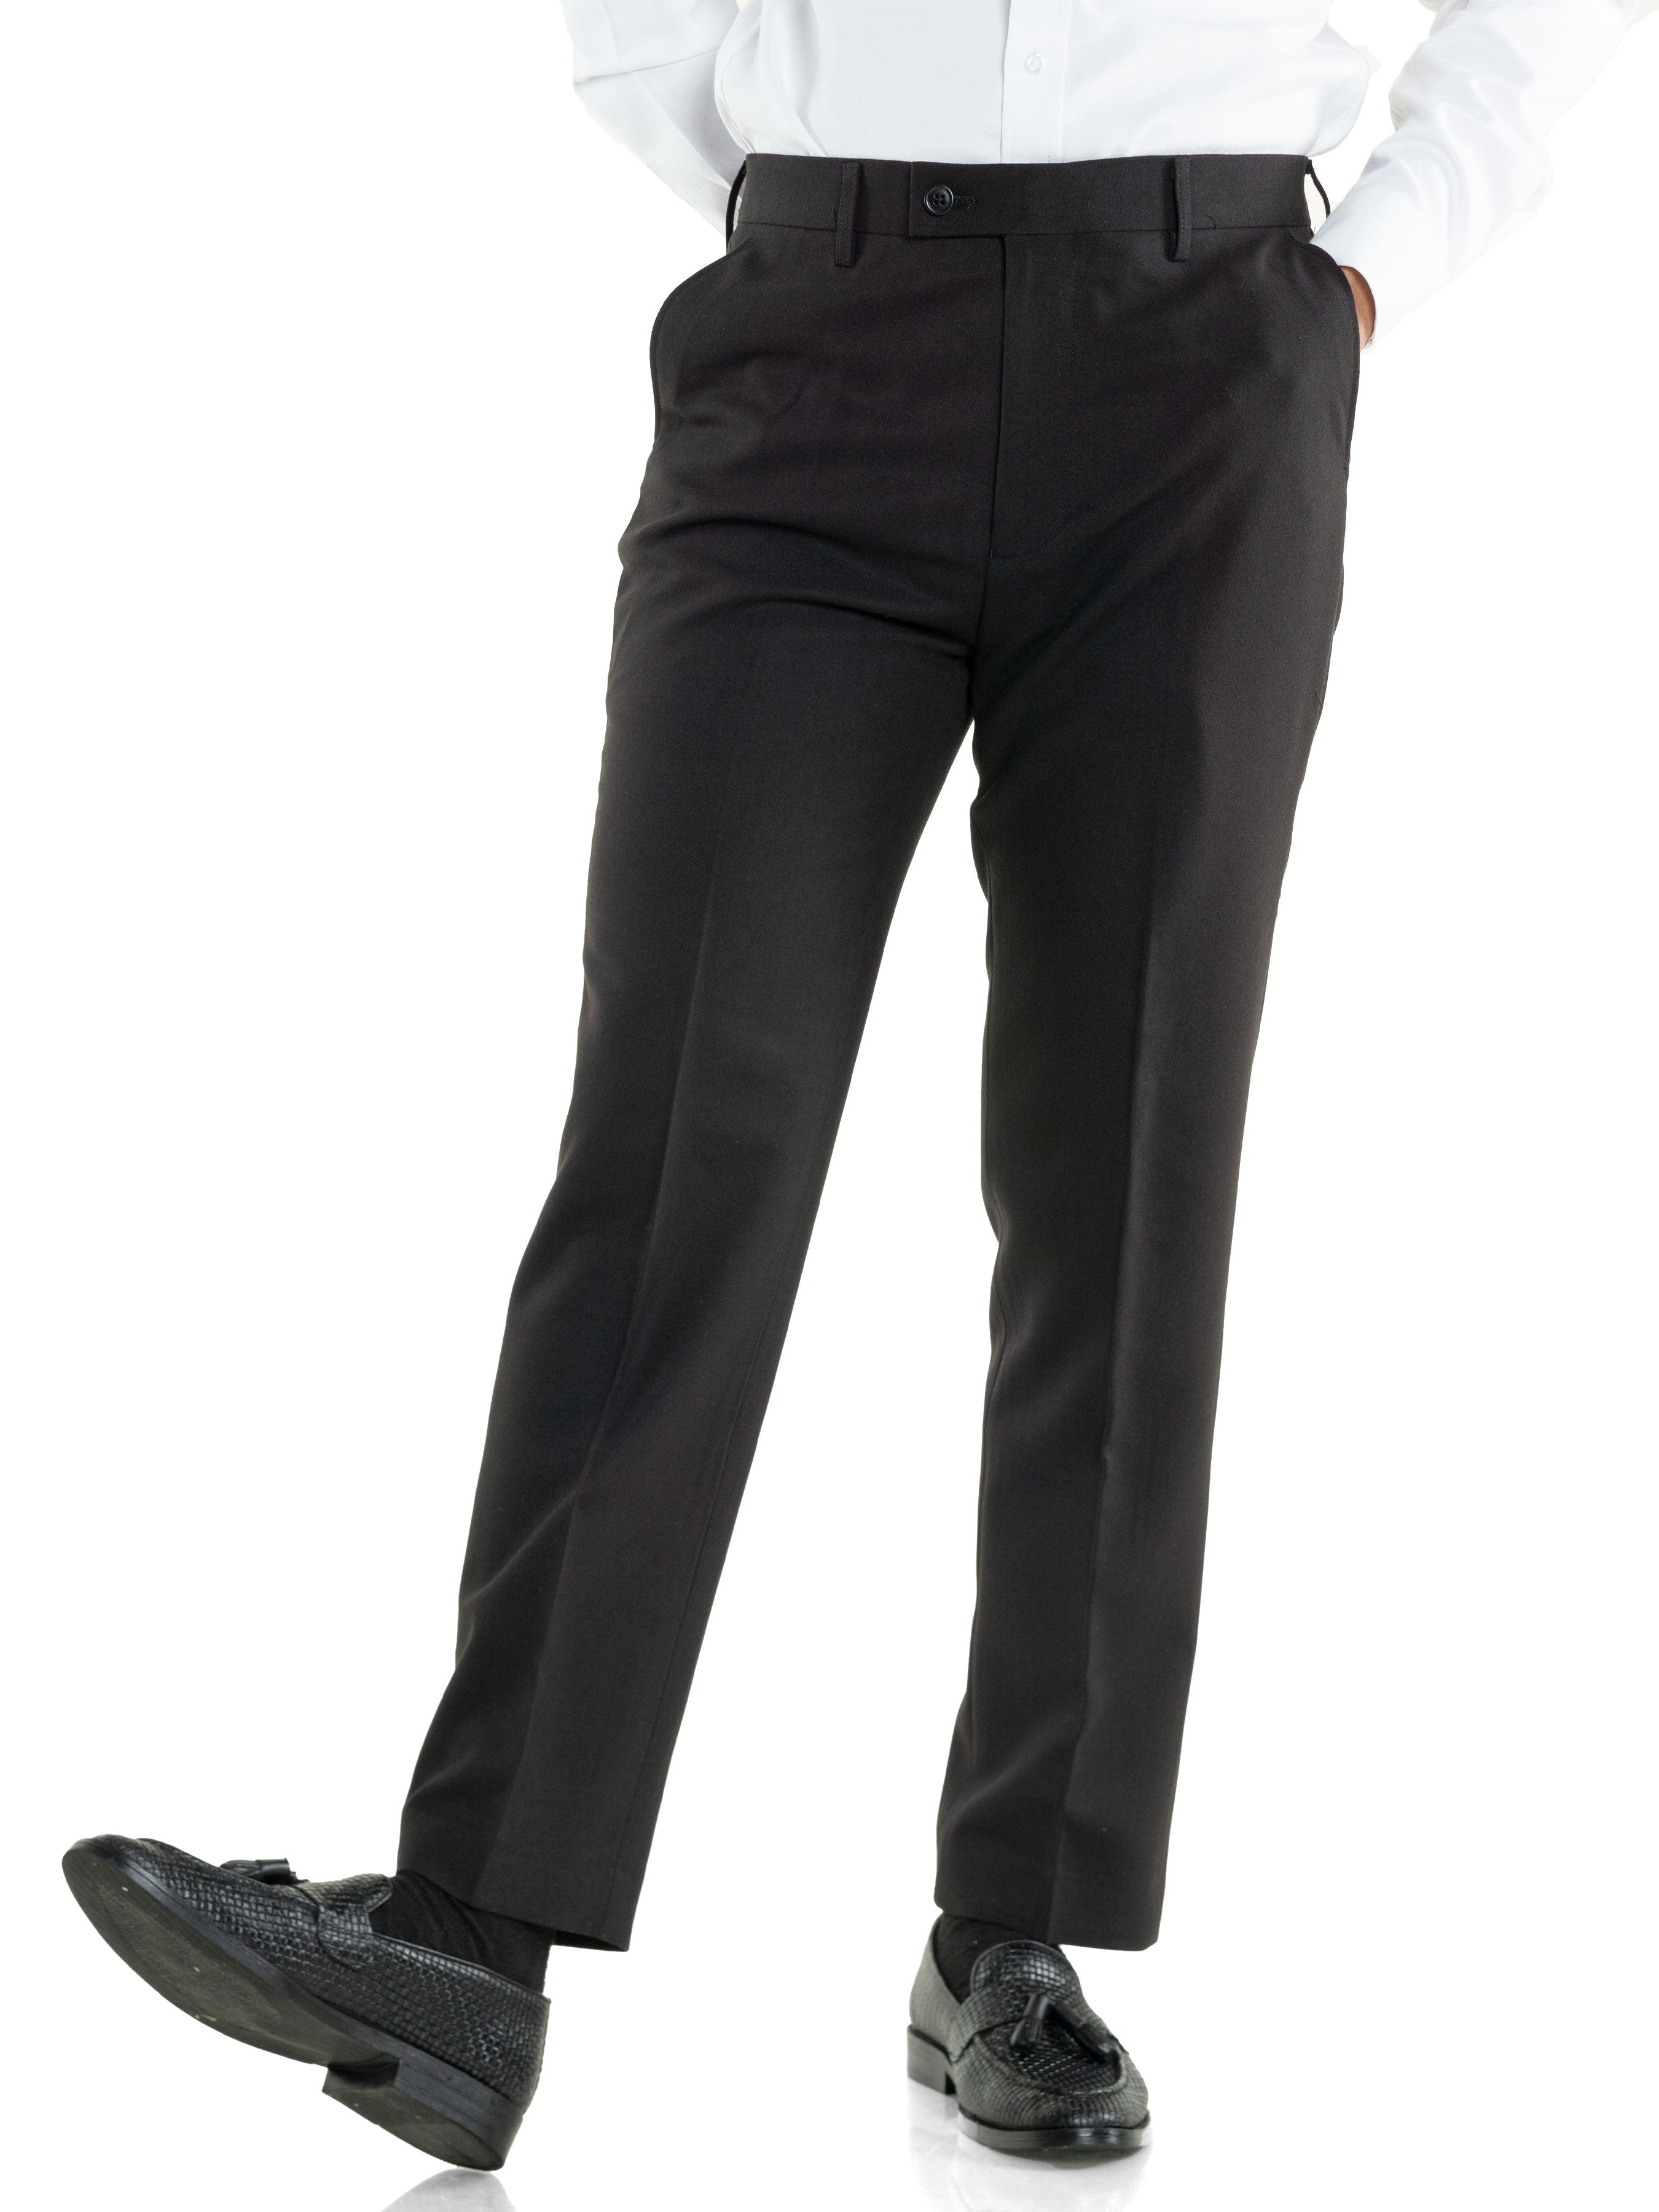 Trousers With Belt Loop - Black Charcoal Plain (Stretchable)